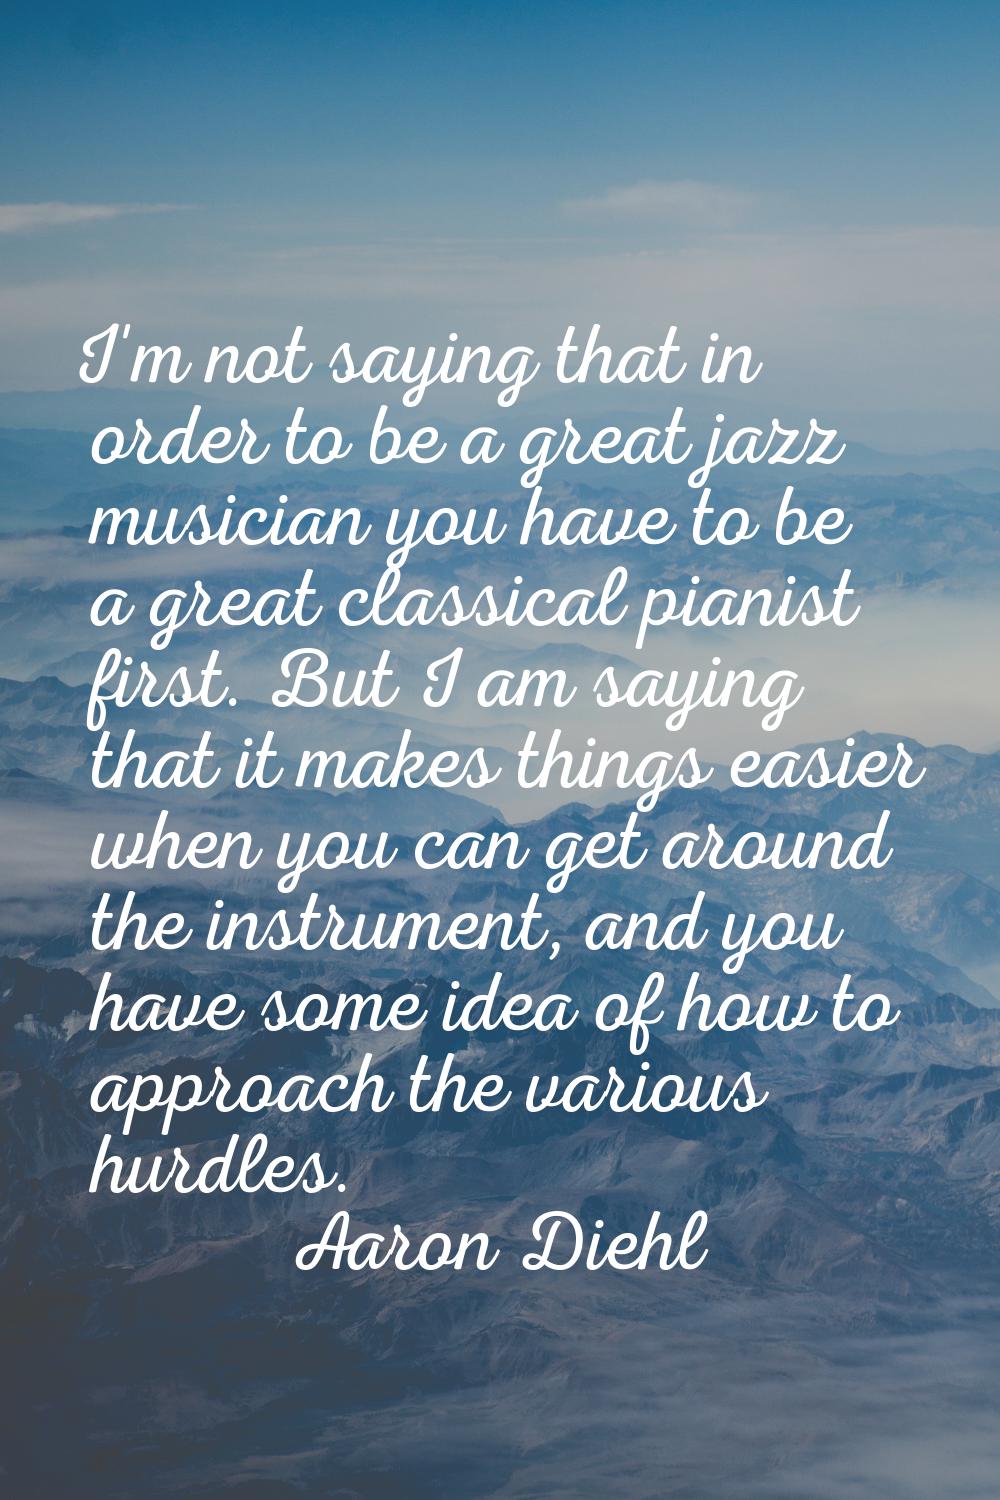 I'm not saying that in order to be a great jazz musician you have to be a great classical pianist f